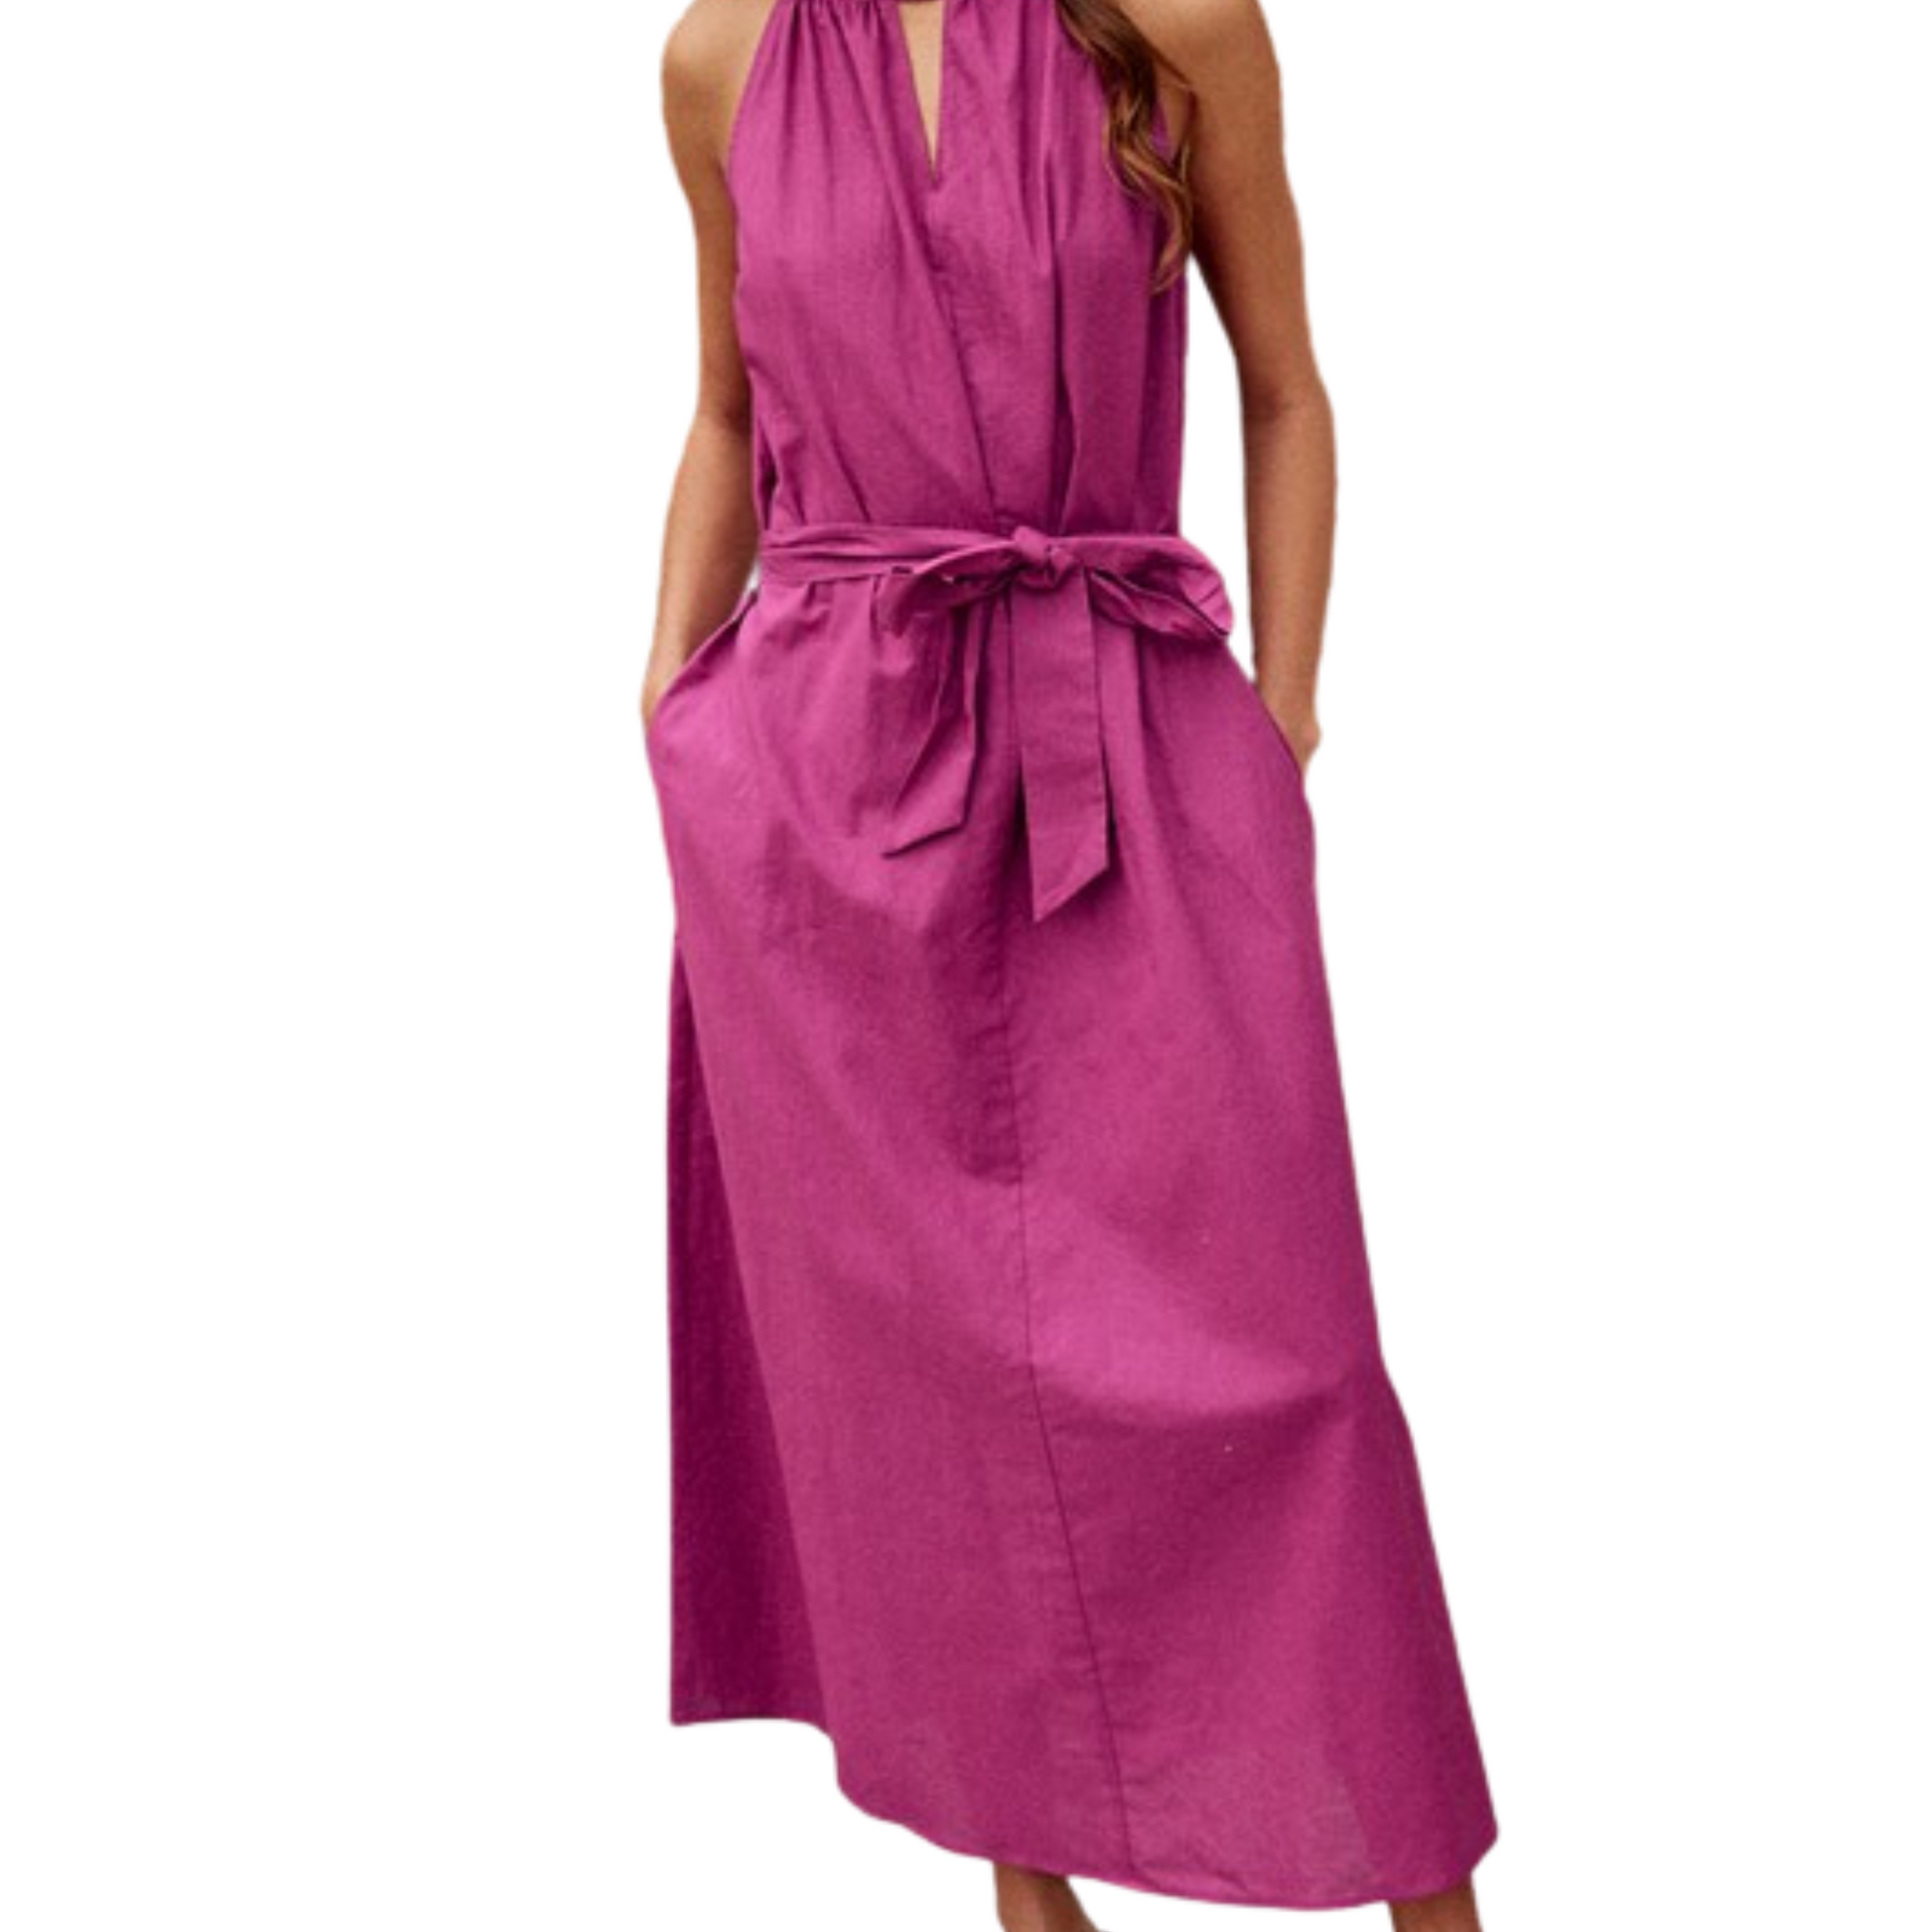 Deep purple maxi dress with halter neckline, pockets and tie, worn by a woman from the front.